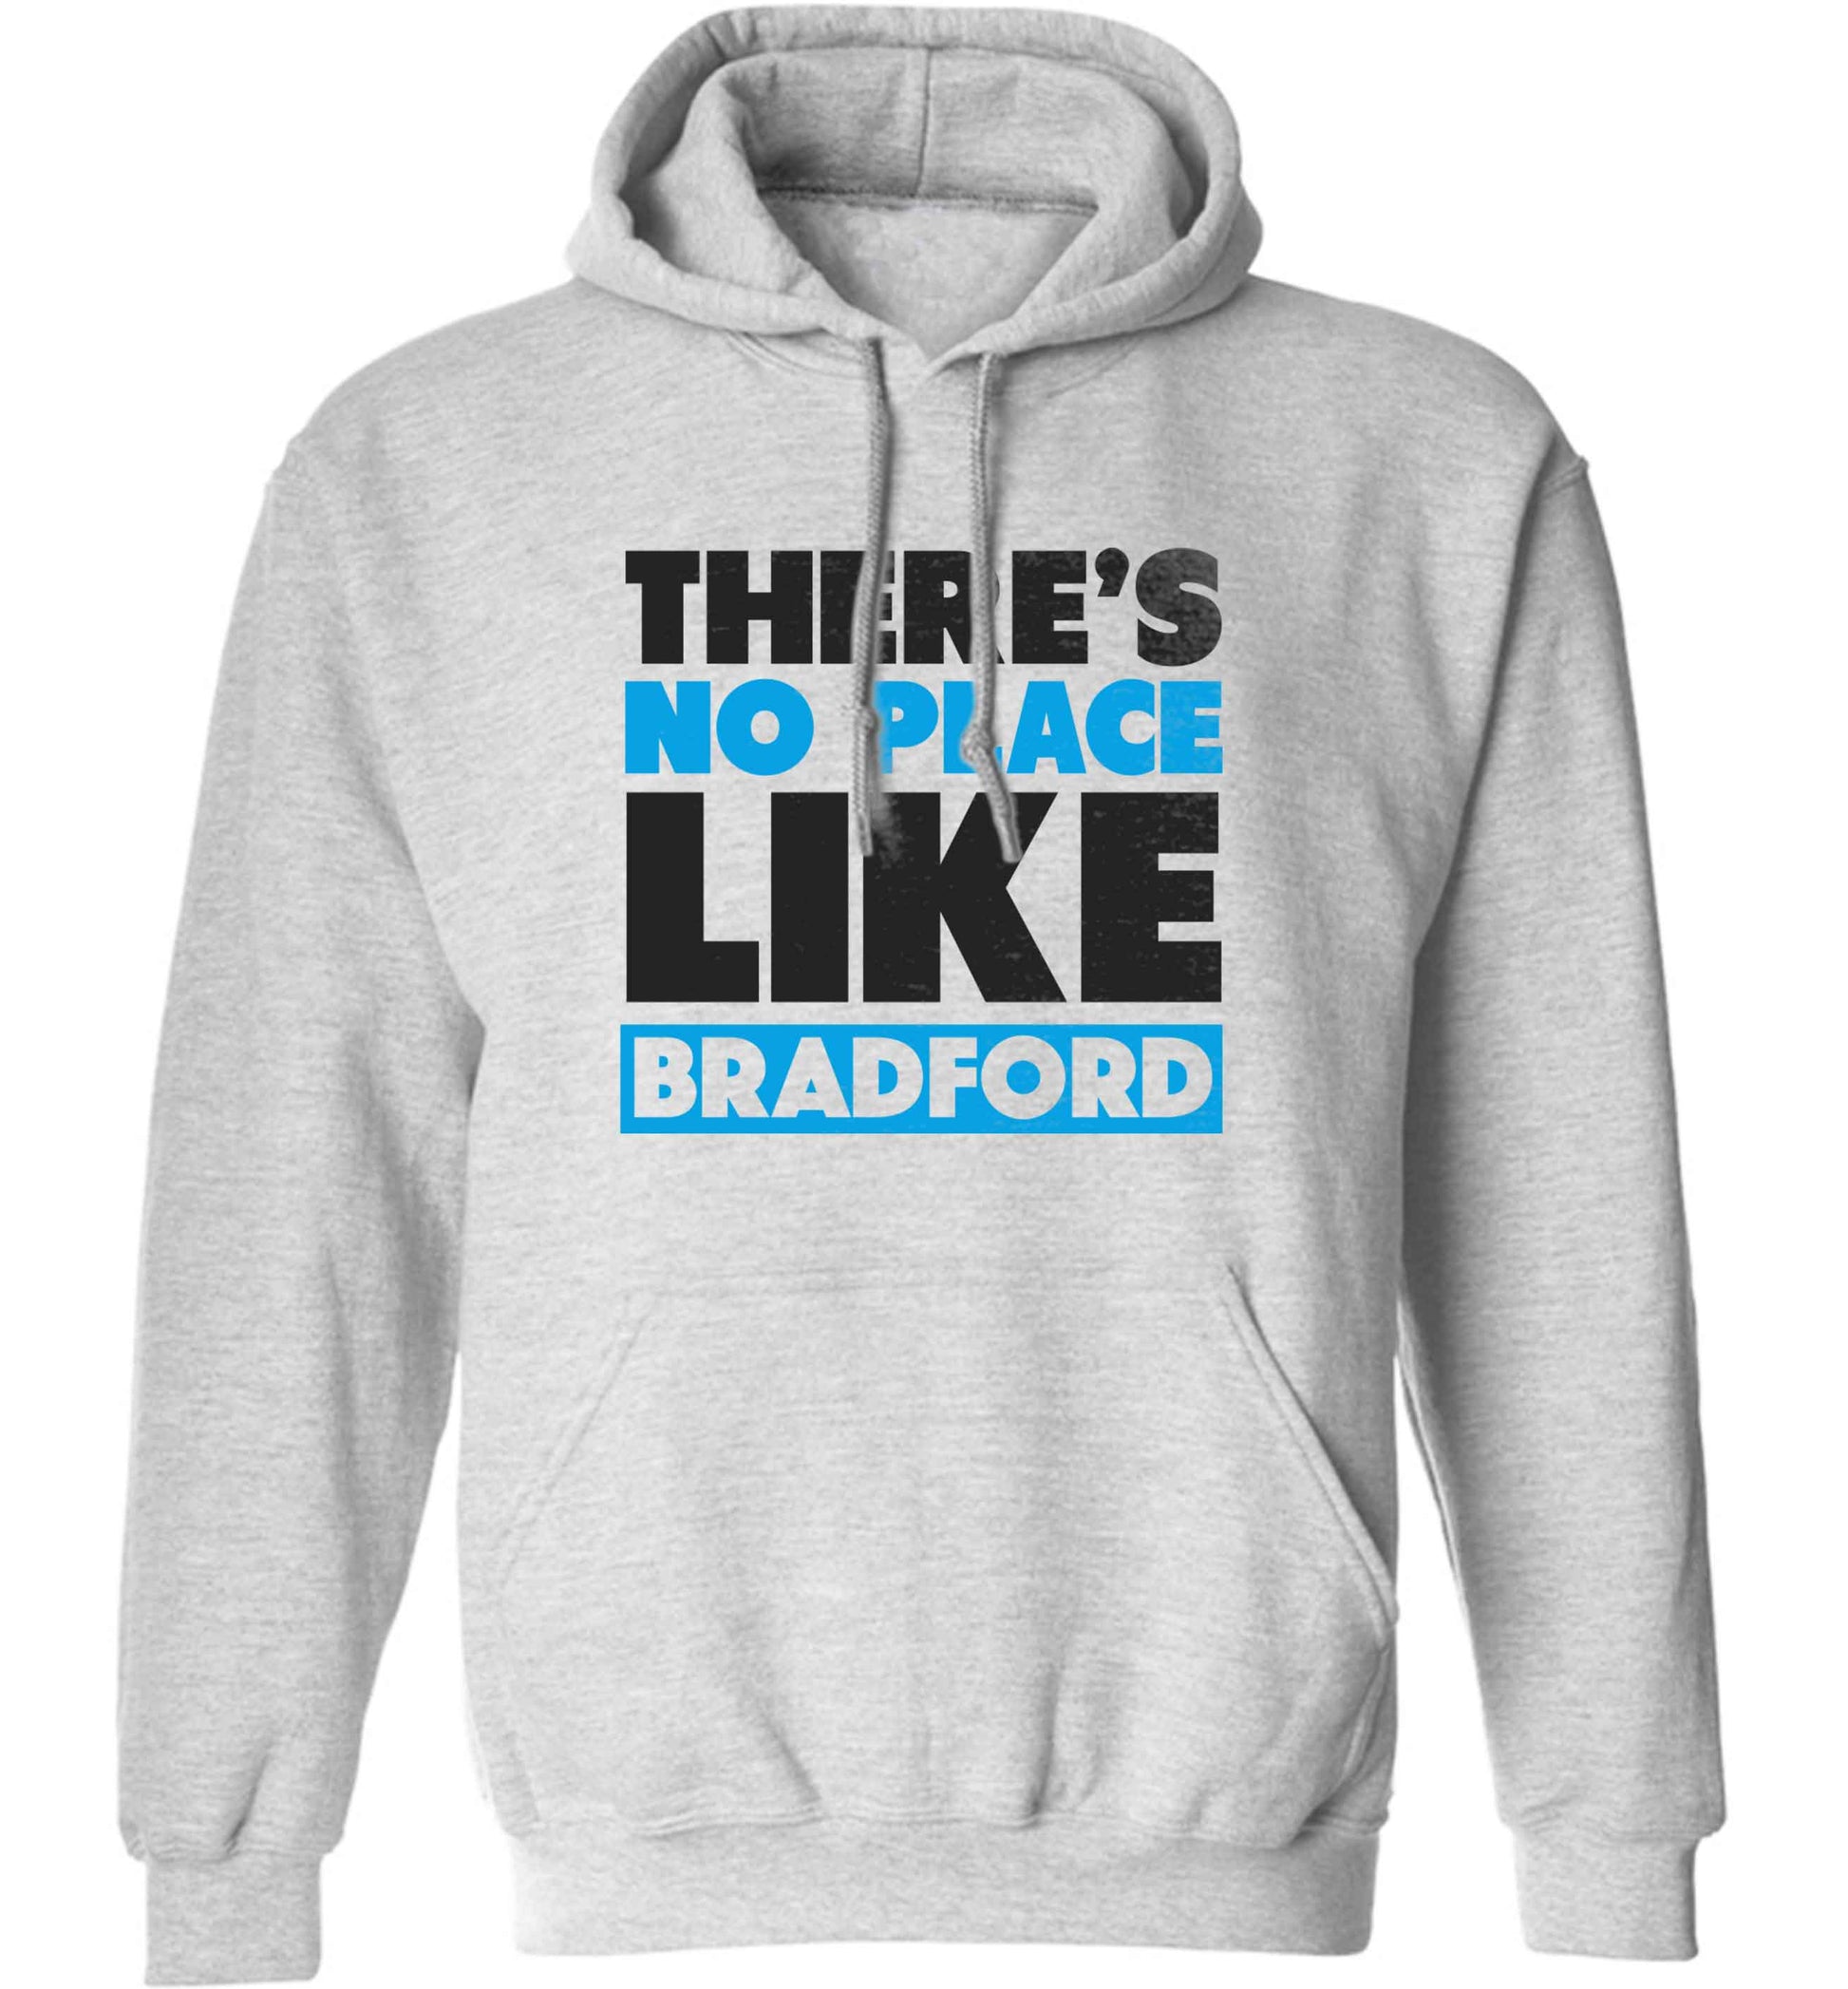 There's no place like Bradford adults unisex grey hoodie 2XL